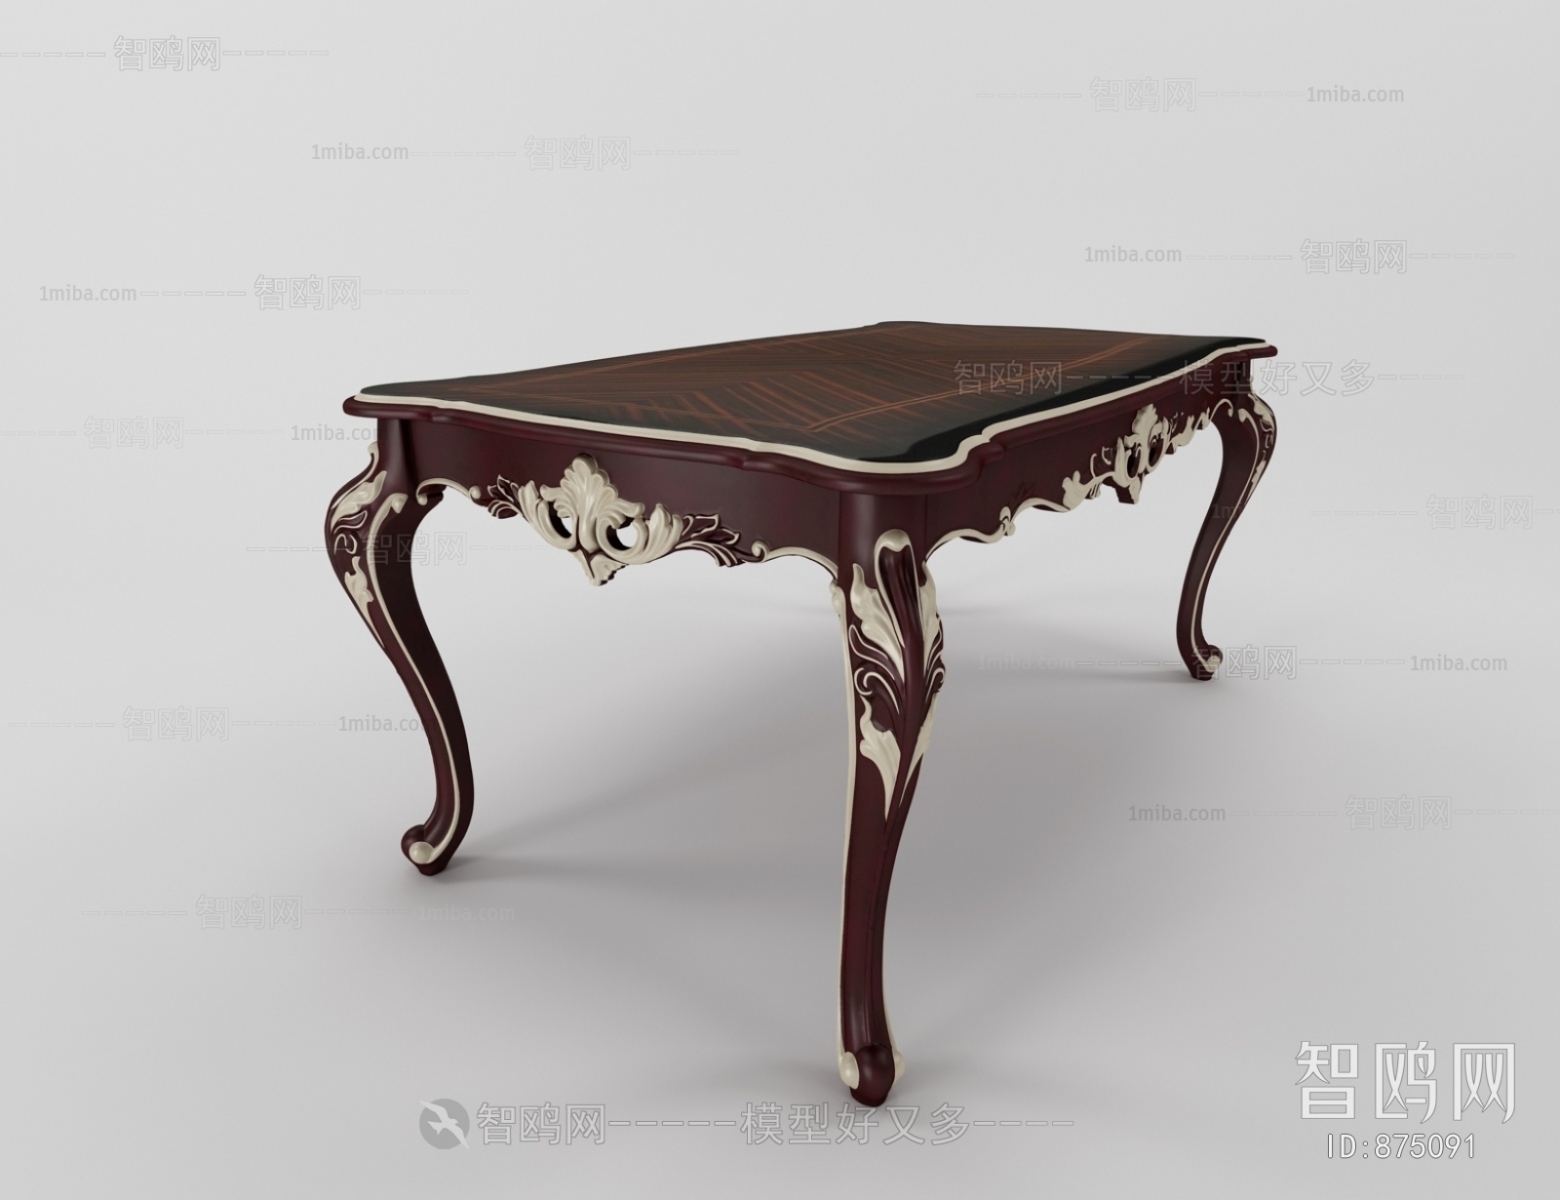 European Style Dining Table